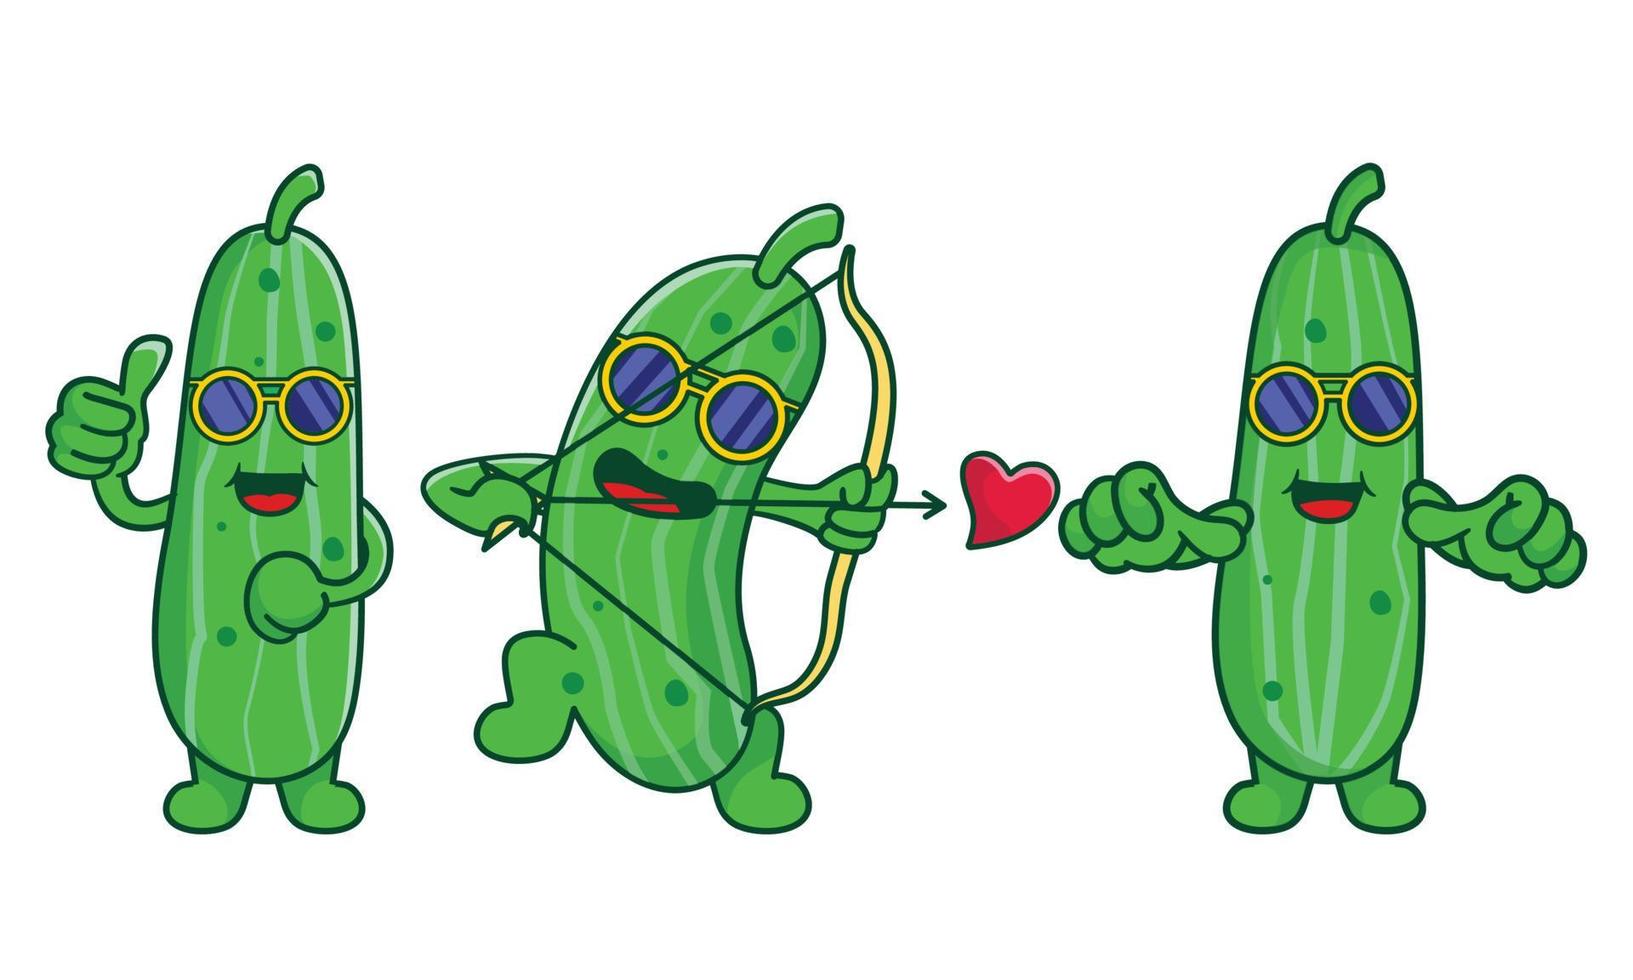 Cute pickle cucumber collection set. Funny and humor cartoon pickle in flat style. Vegetable clipart vector illustration template